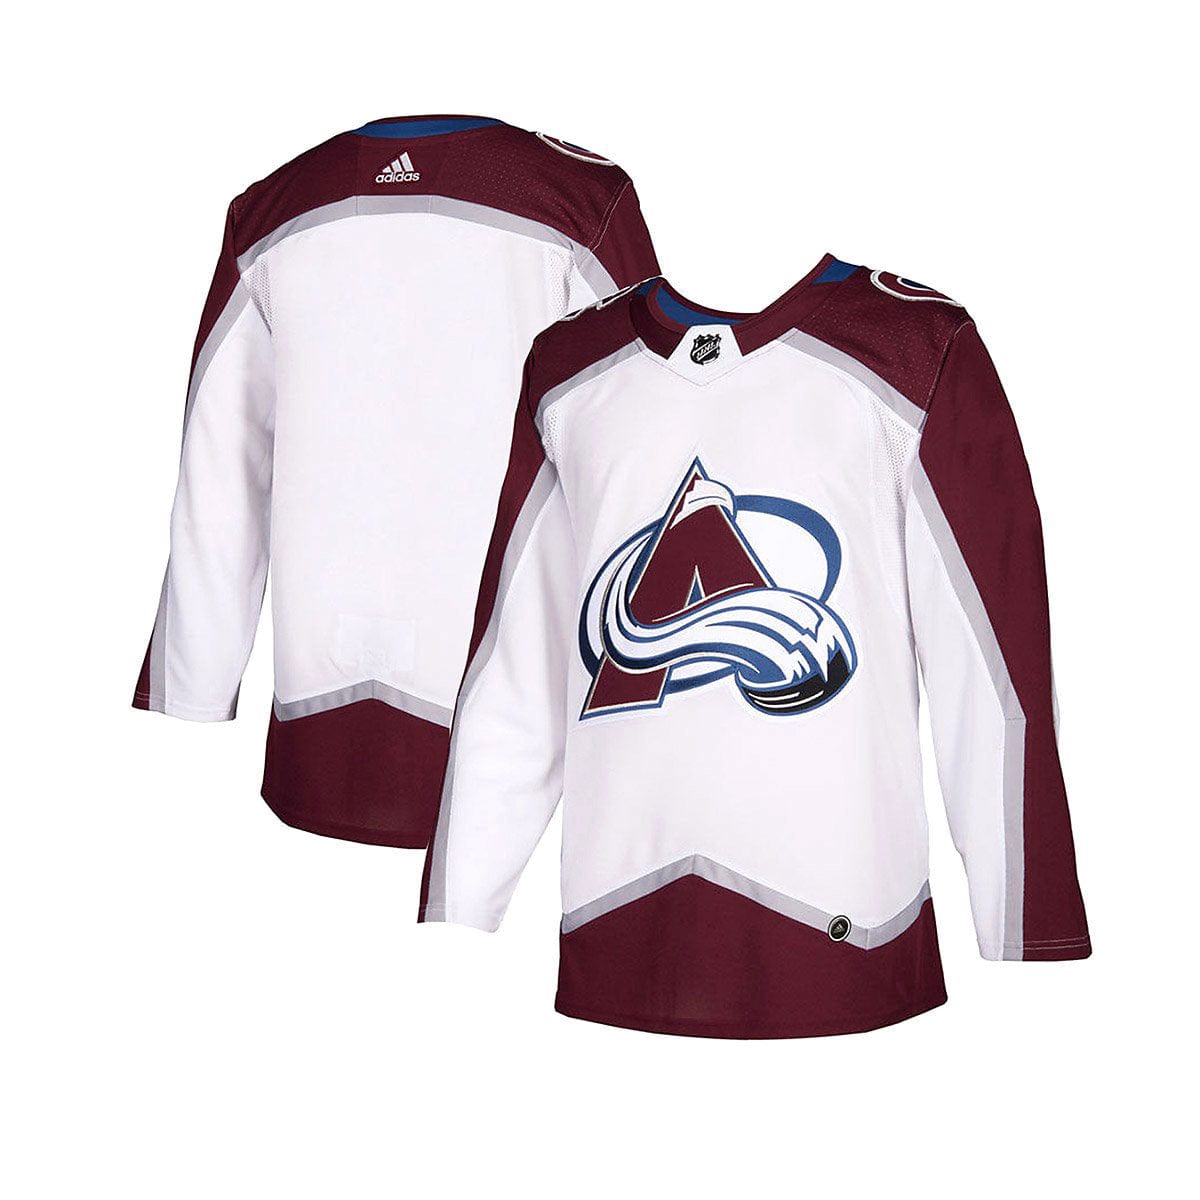 Men's adidas White Colorado Avalanche Away Authentic Pro Team Jersey